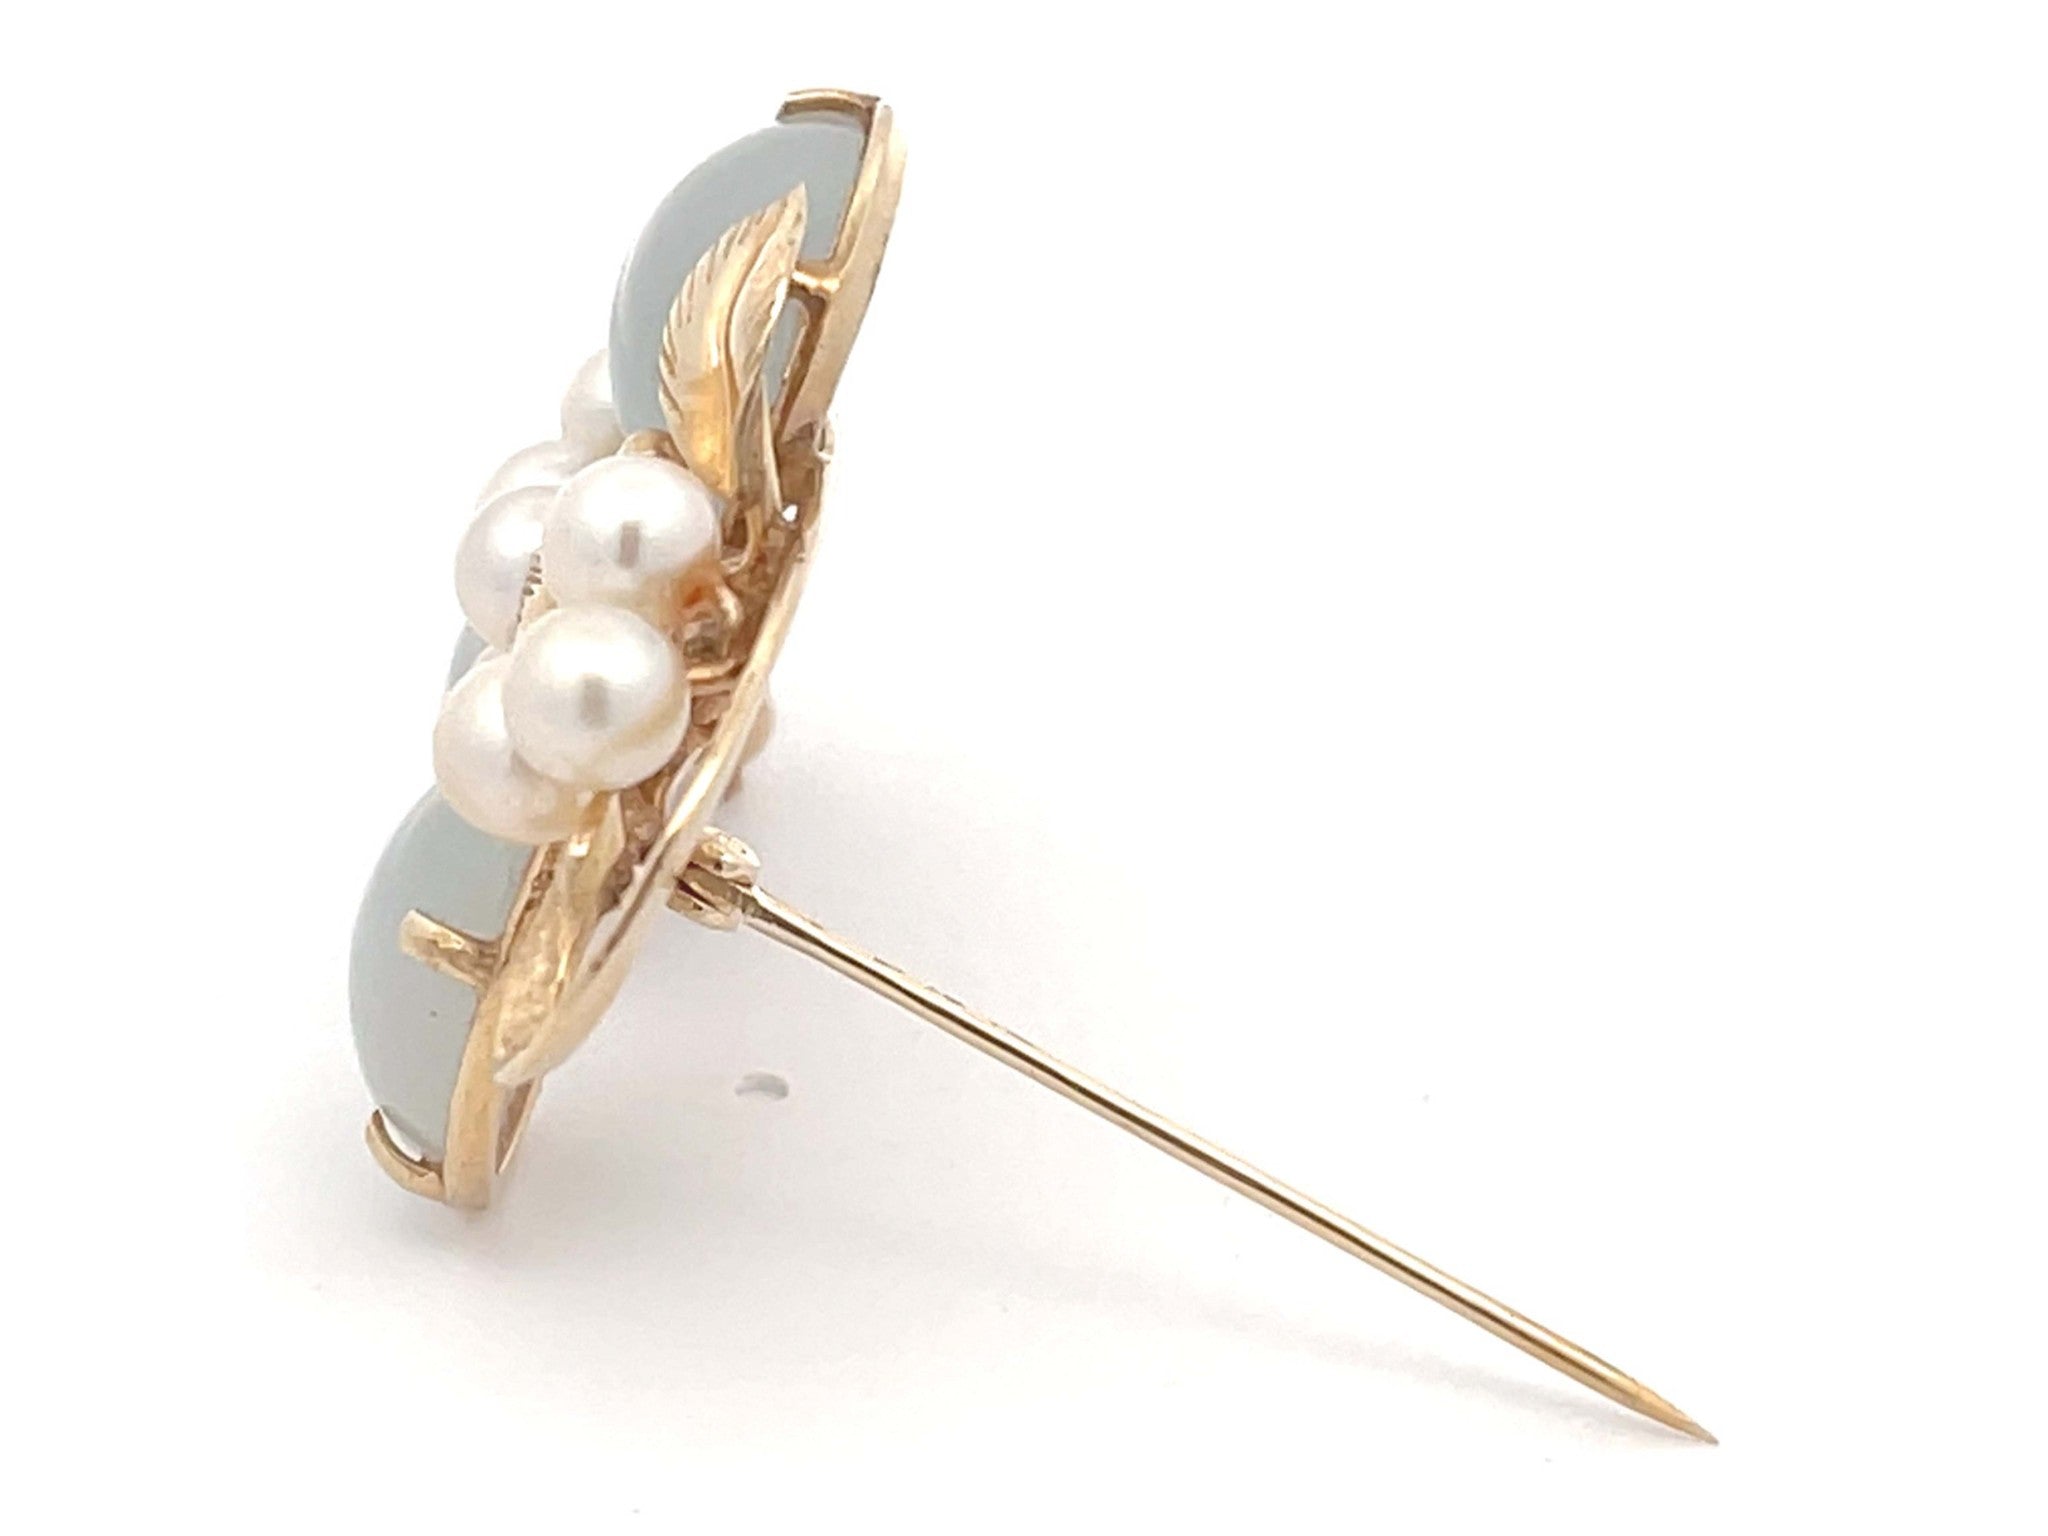 Mings Pale Oval Jade and Pearls Branch Brooch in 14k Yellow Gold